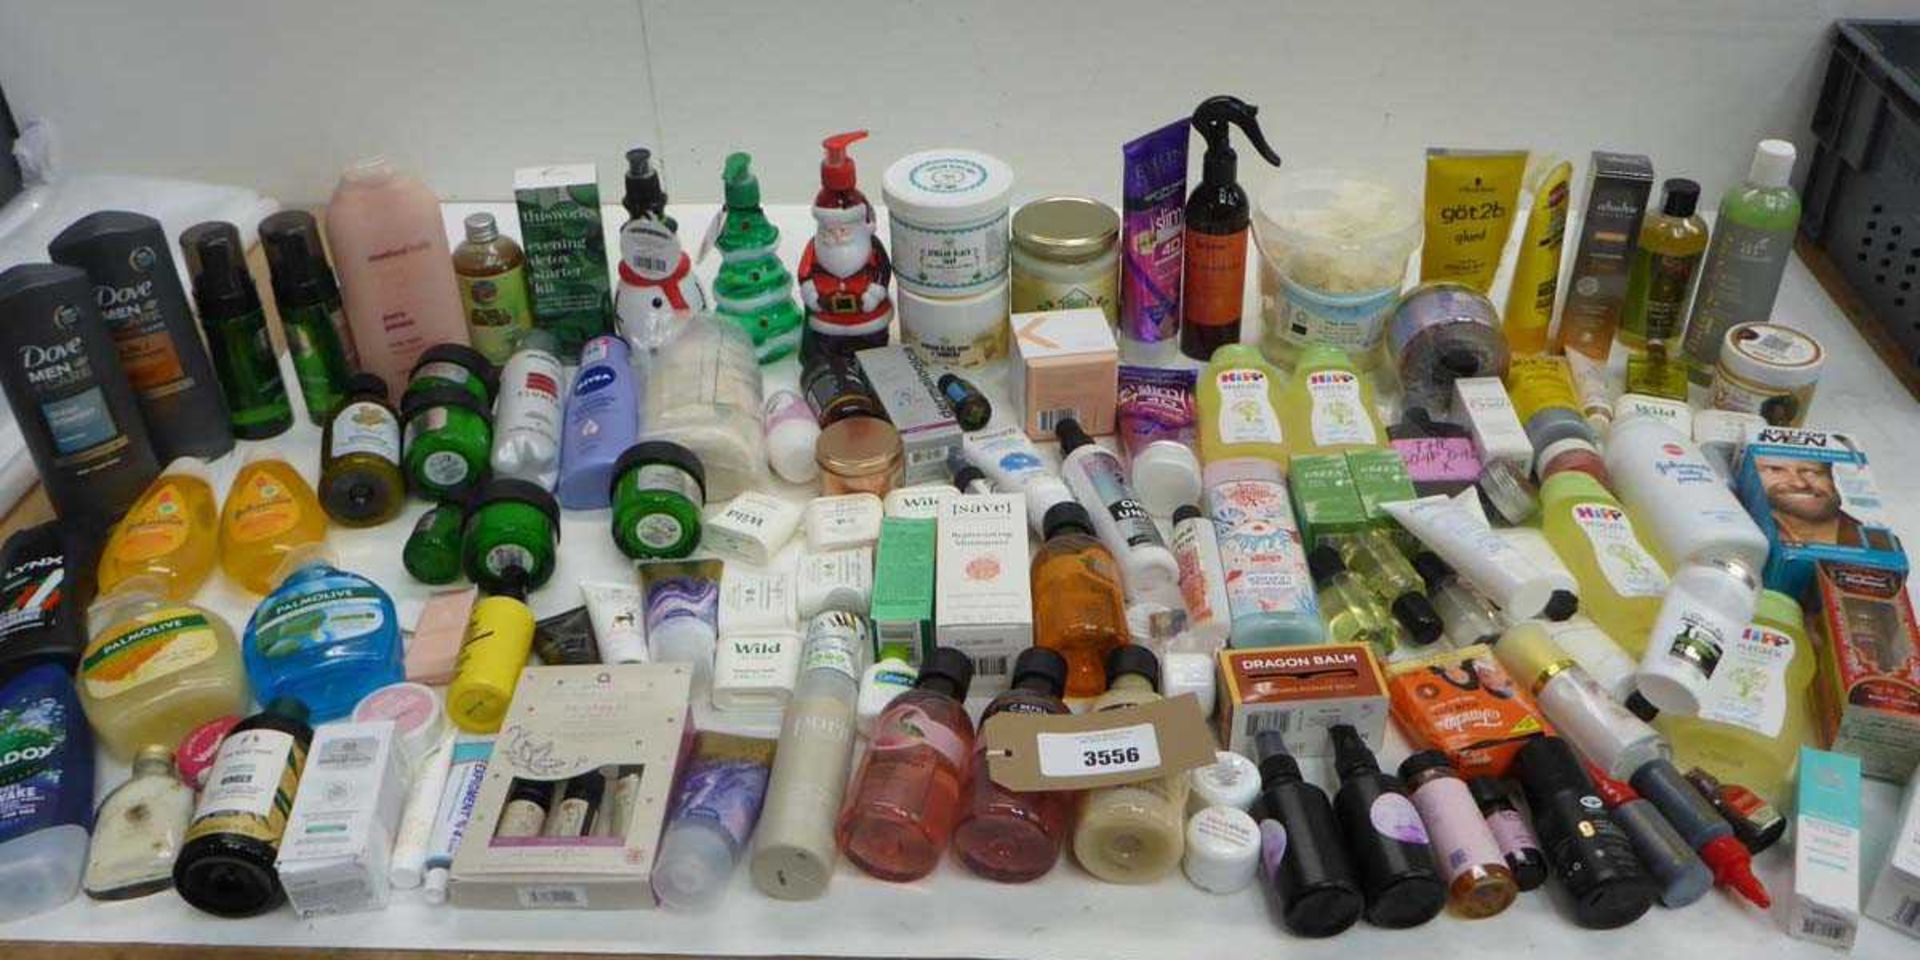 +VAT Large bag of toiletries including body wash, detox kit, shea butter, hair products,